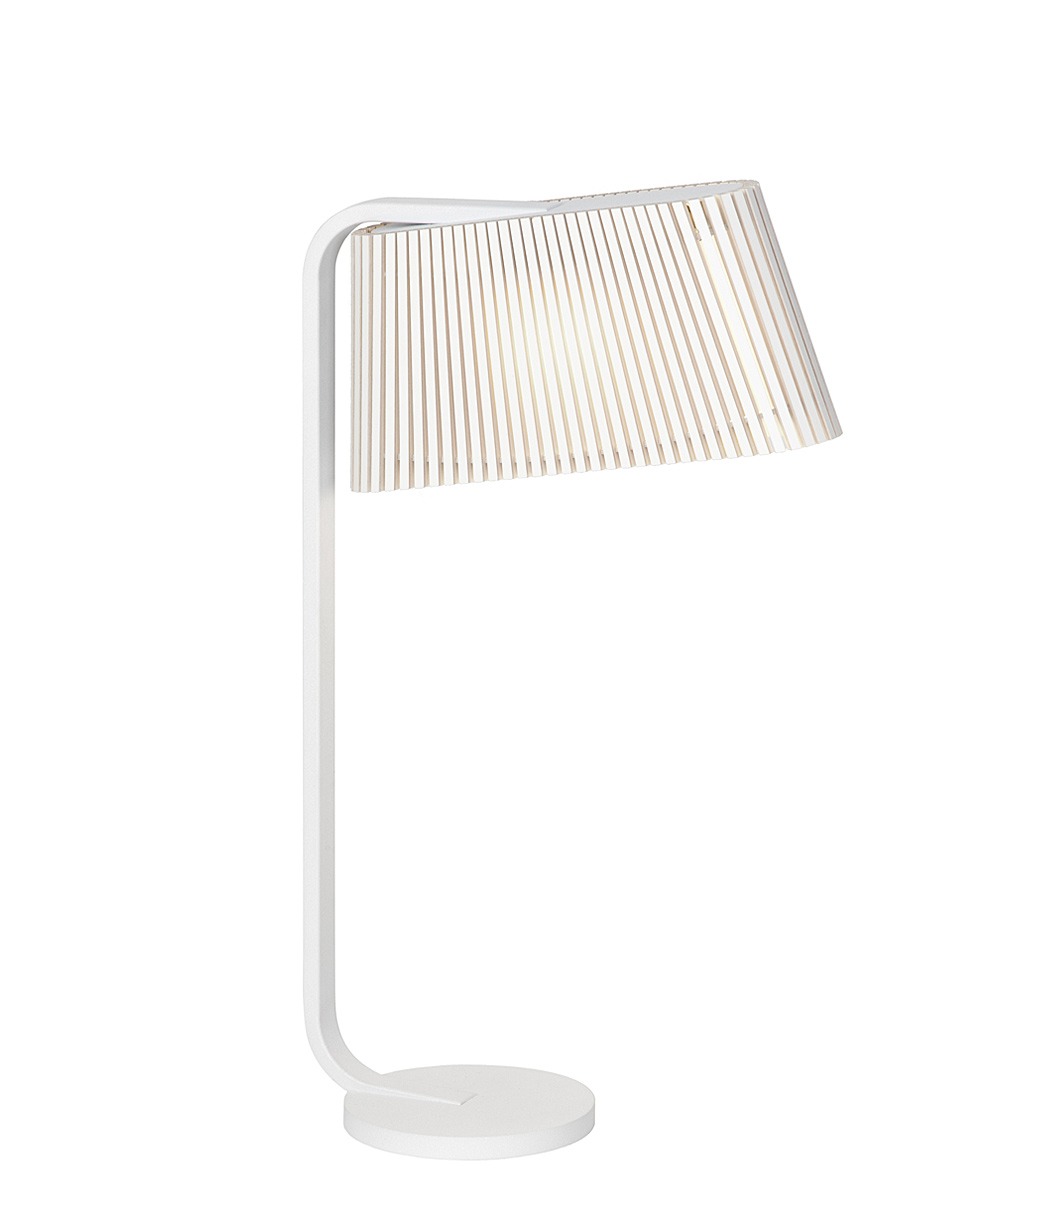 Owalo 7020 table lamp is available in white laminated